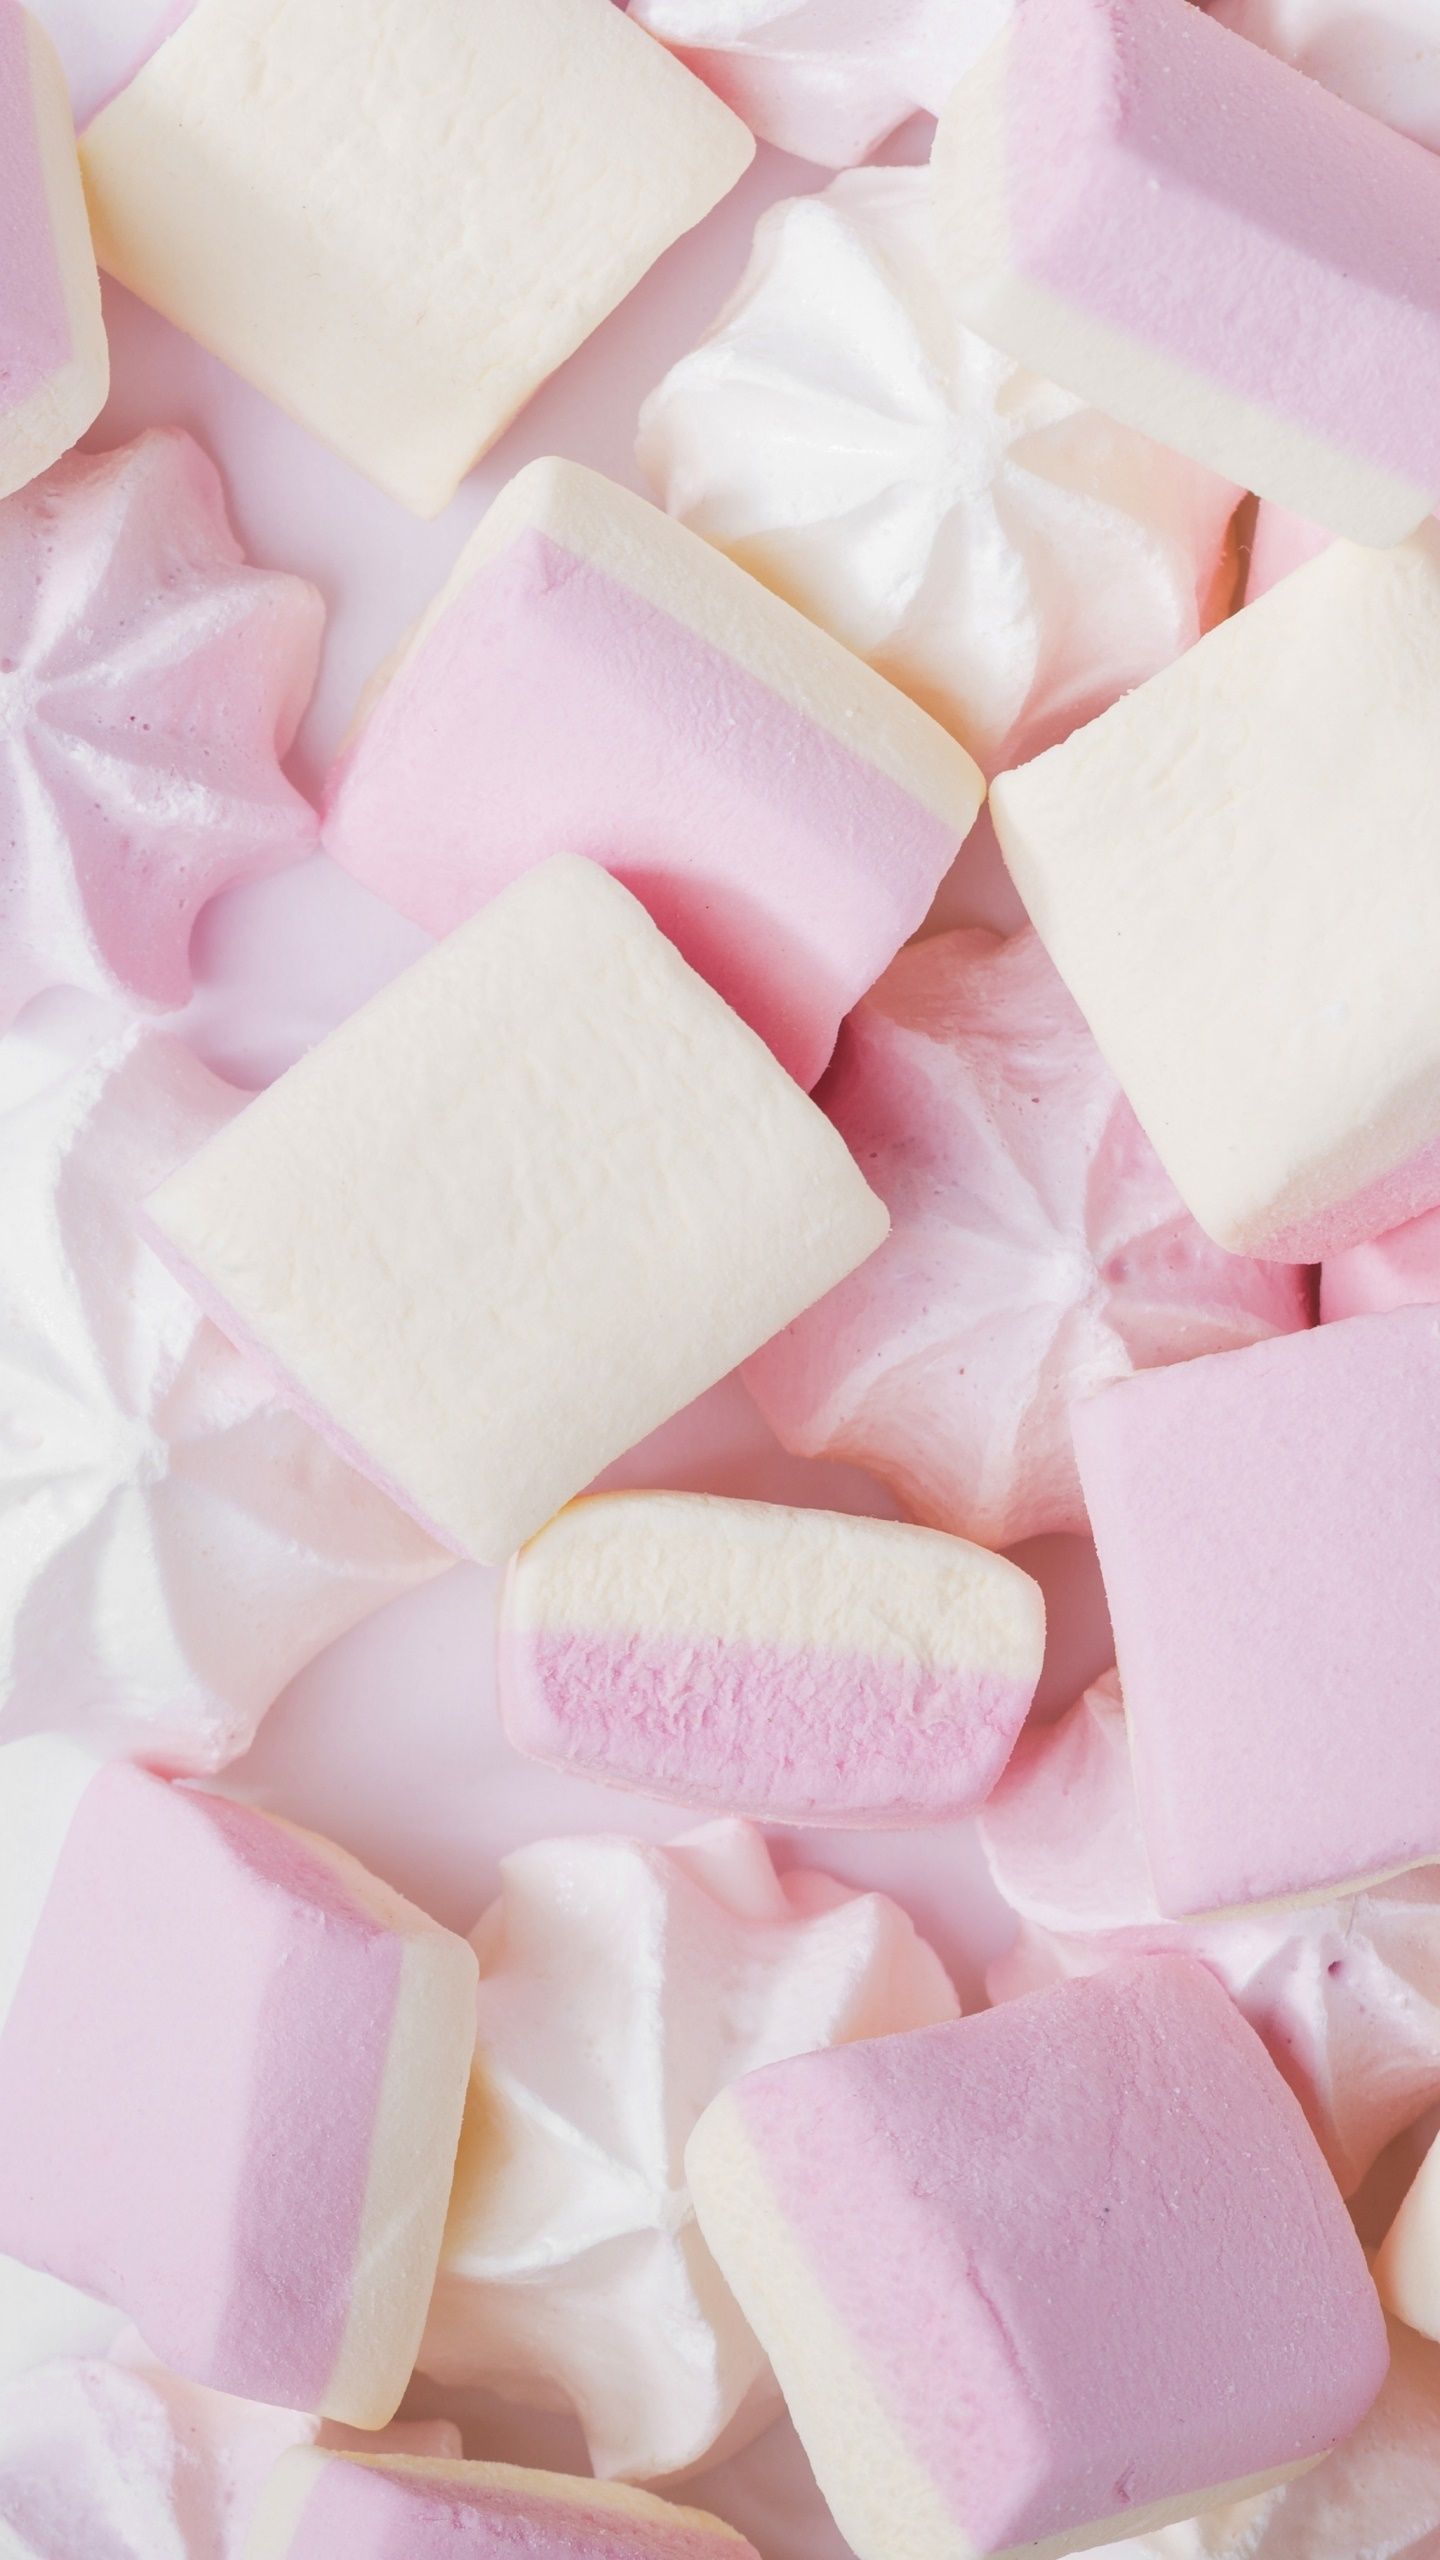 Wallpaper / Food Marshmallow Phone Wallpaper, Sweets, Candy, 1440x2560 free download